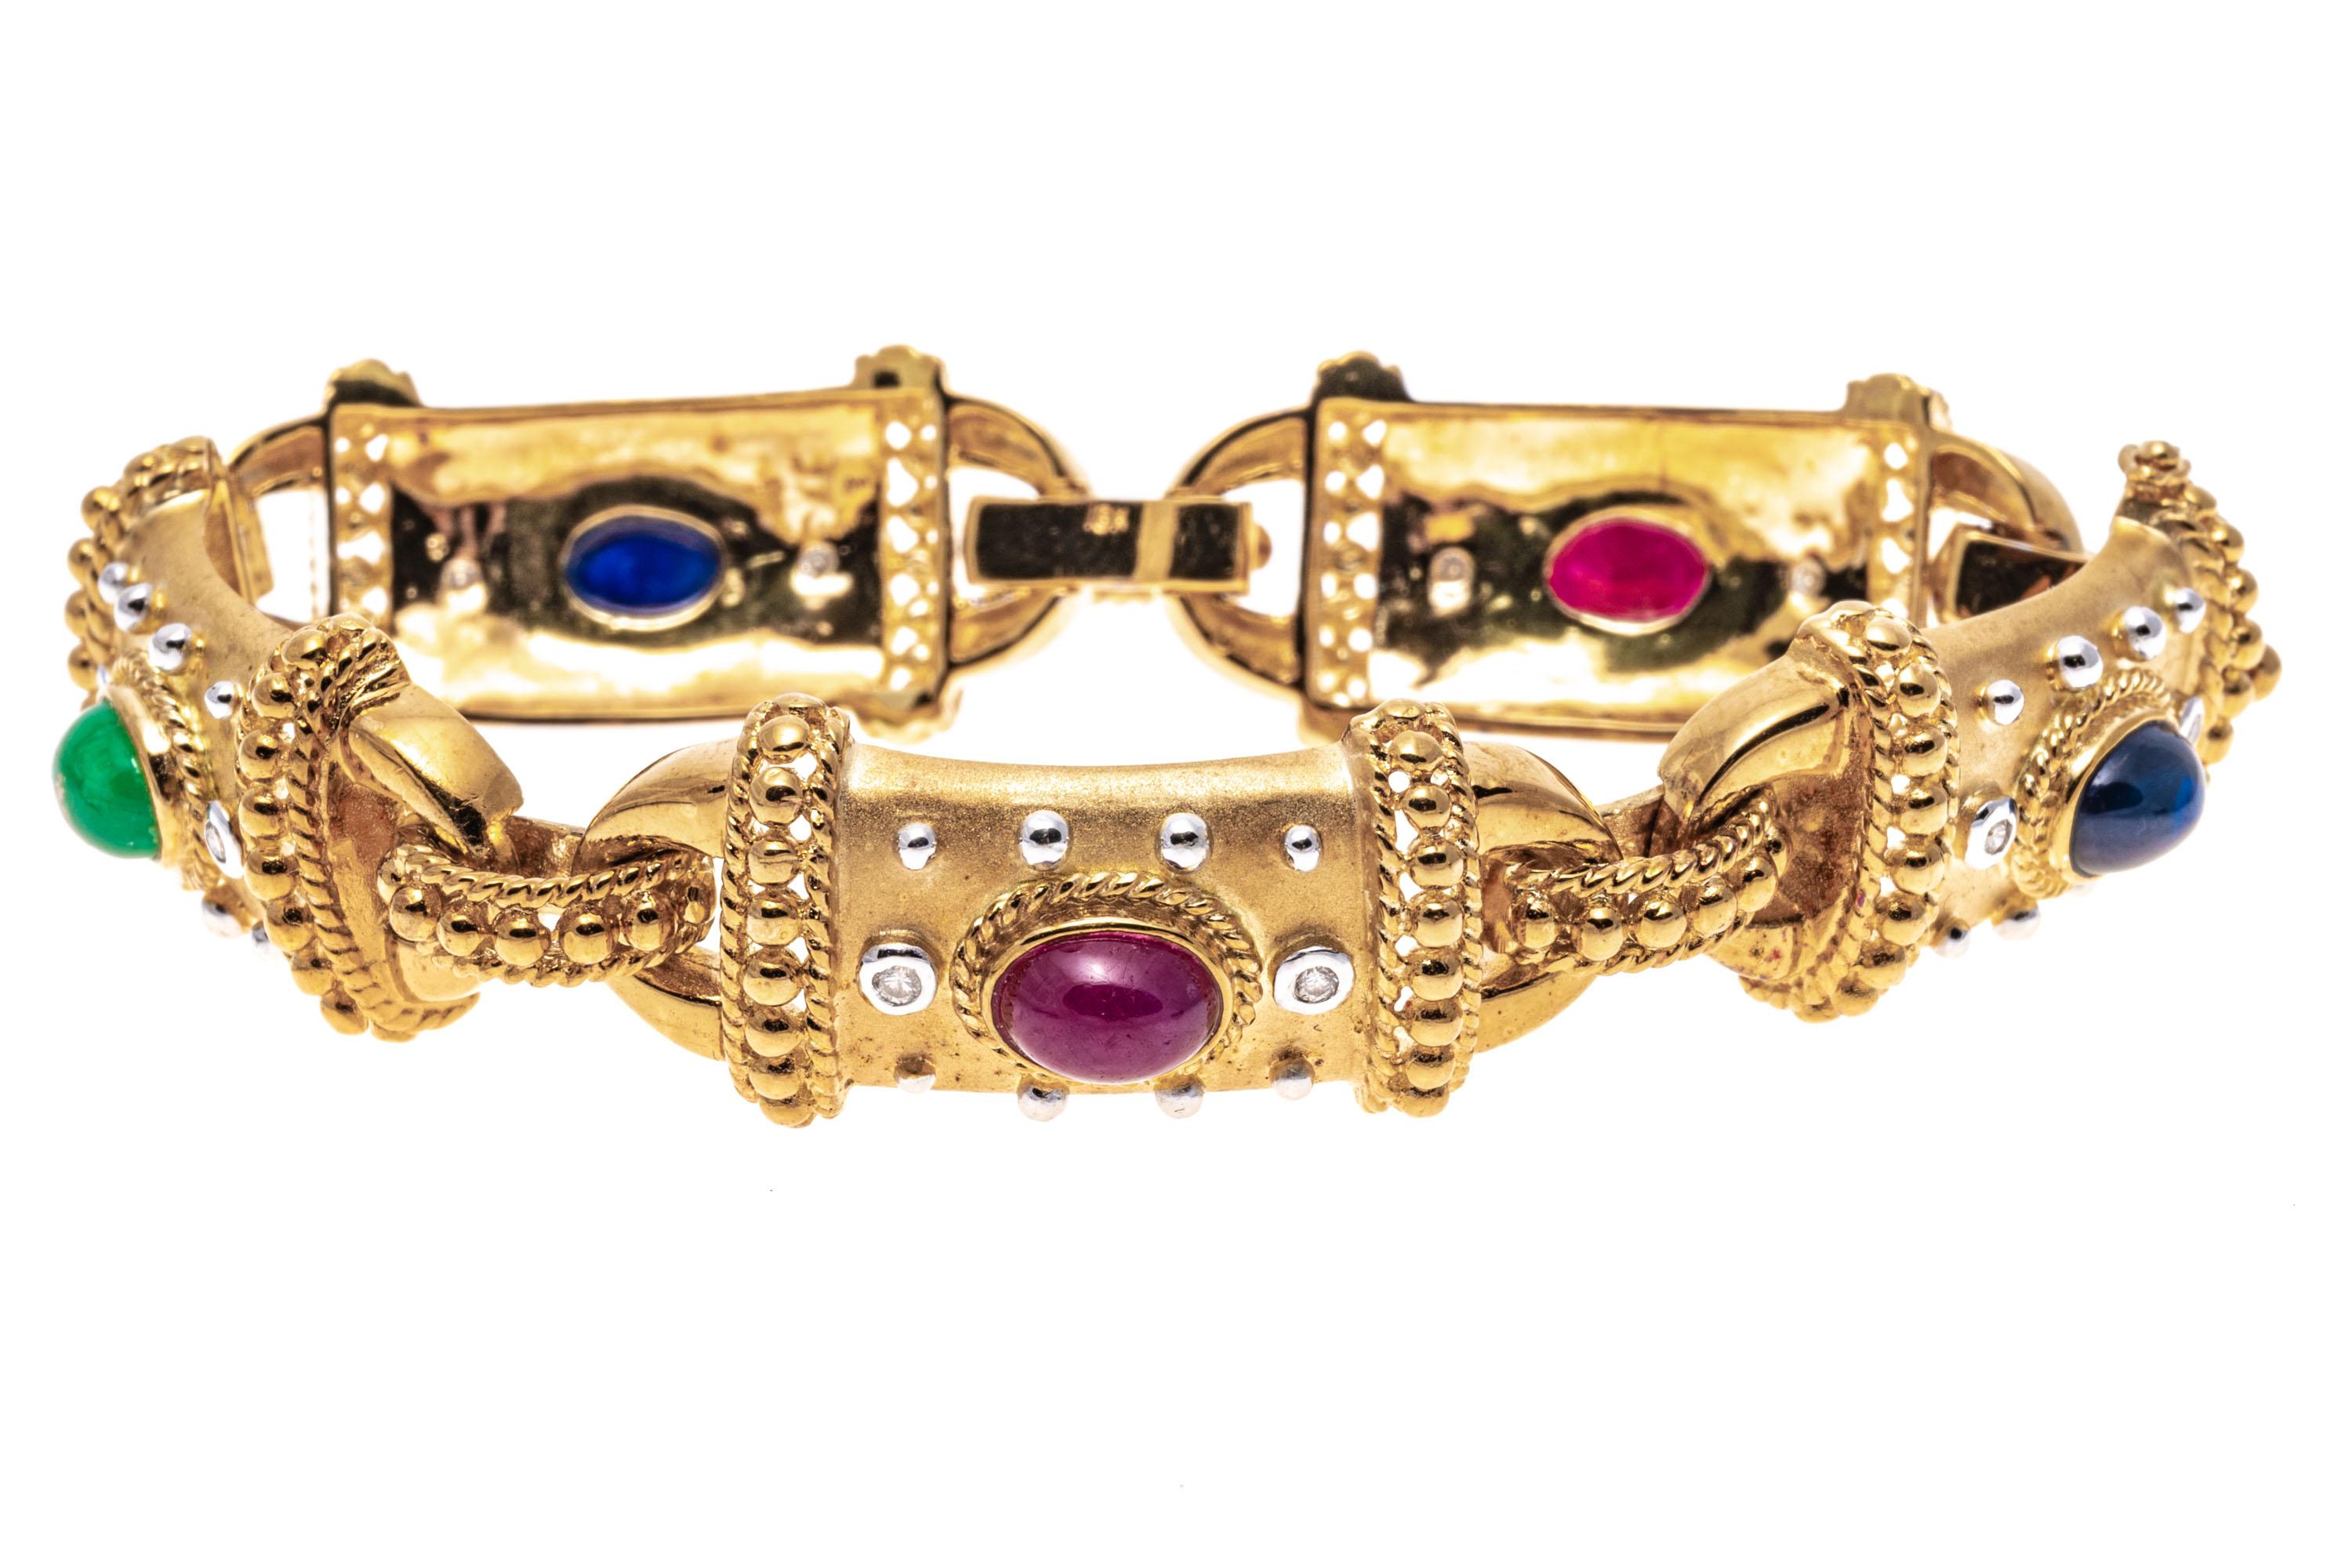 18k Yellow Gold Cabachon Ruby, Emerald, Sapphire And Diamond Link Bracelet.
This gorgeous bracelet is a rectangular link style, with a brushed finish, set with beaded ends, accented with round faceted, bezel set diamonds (approximately 0.15 TCW),